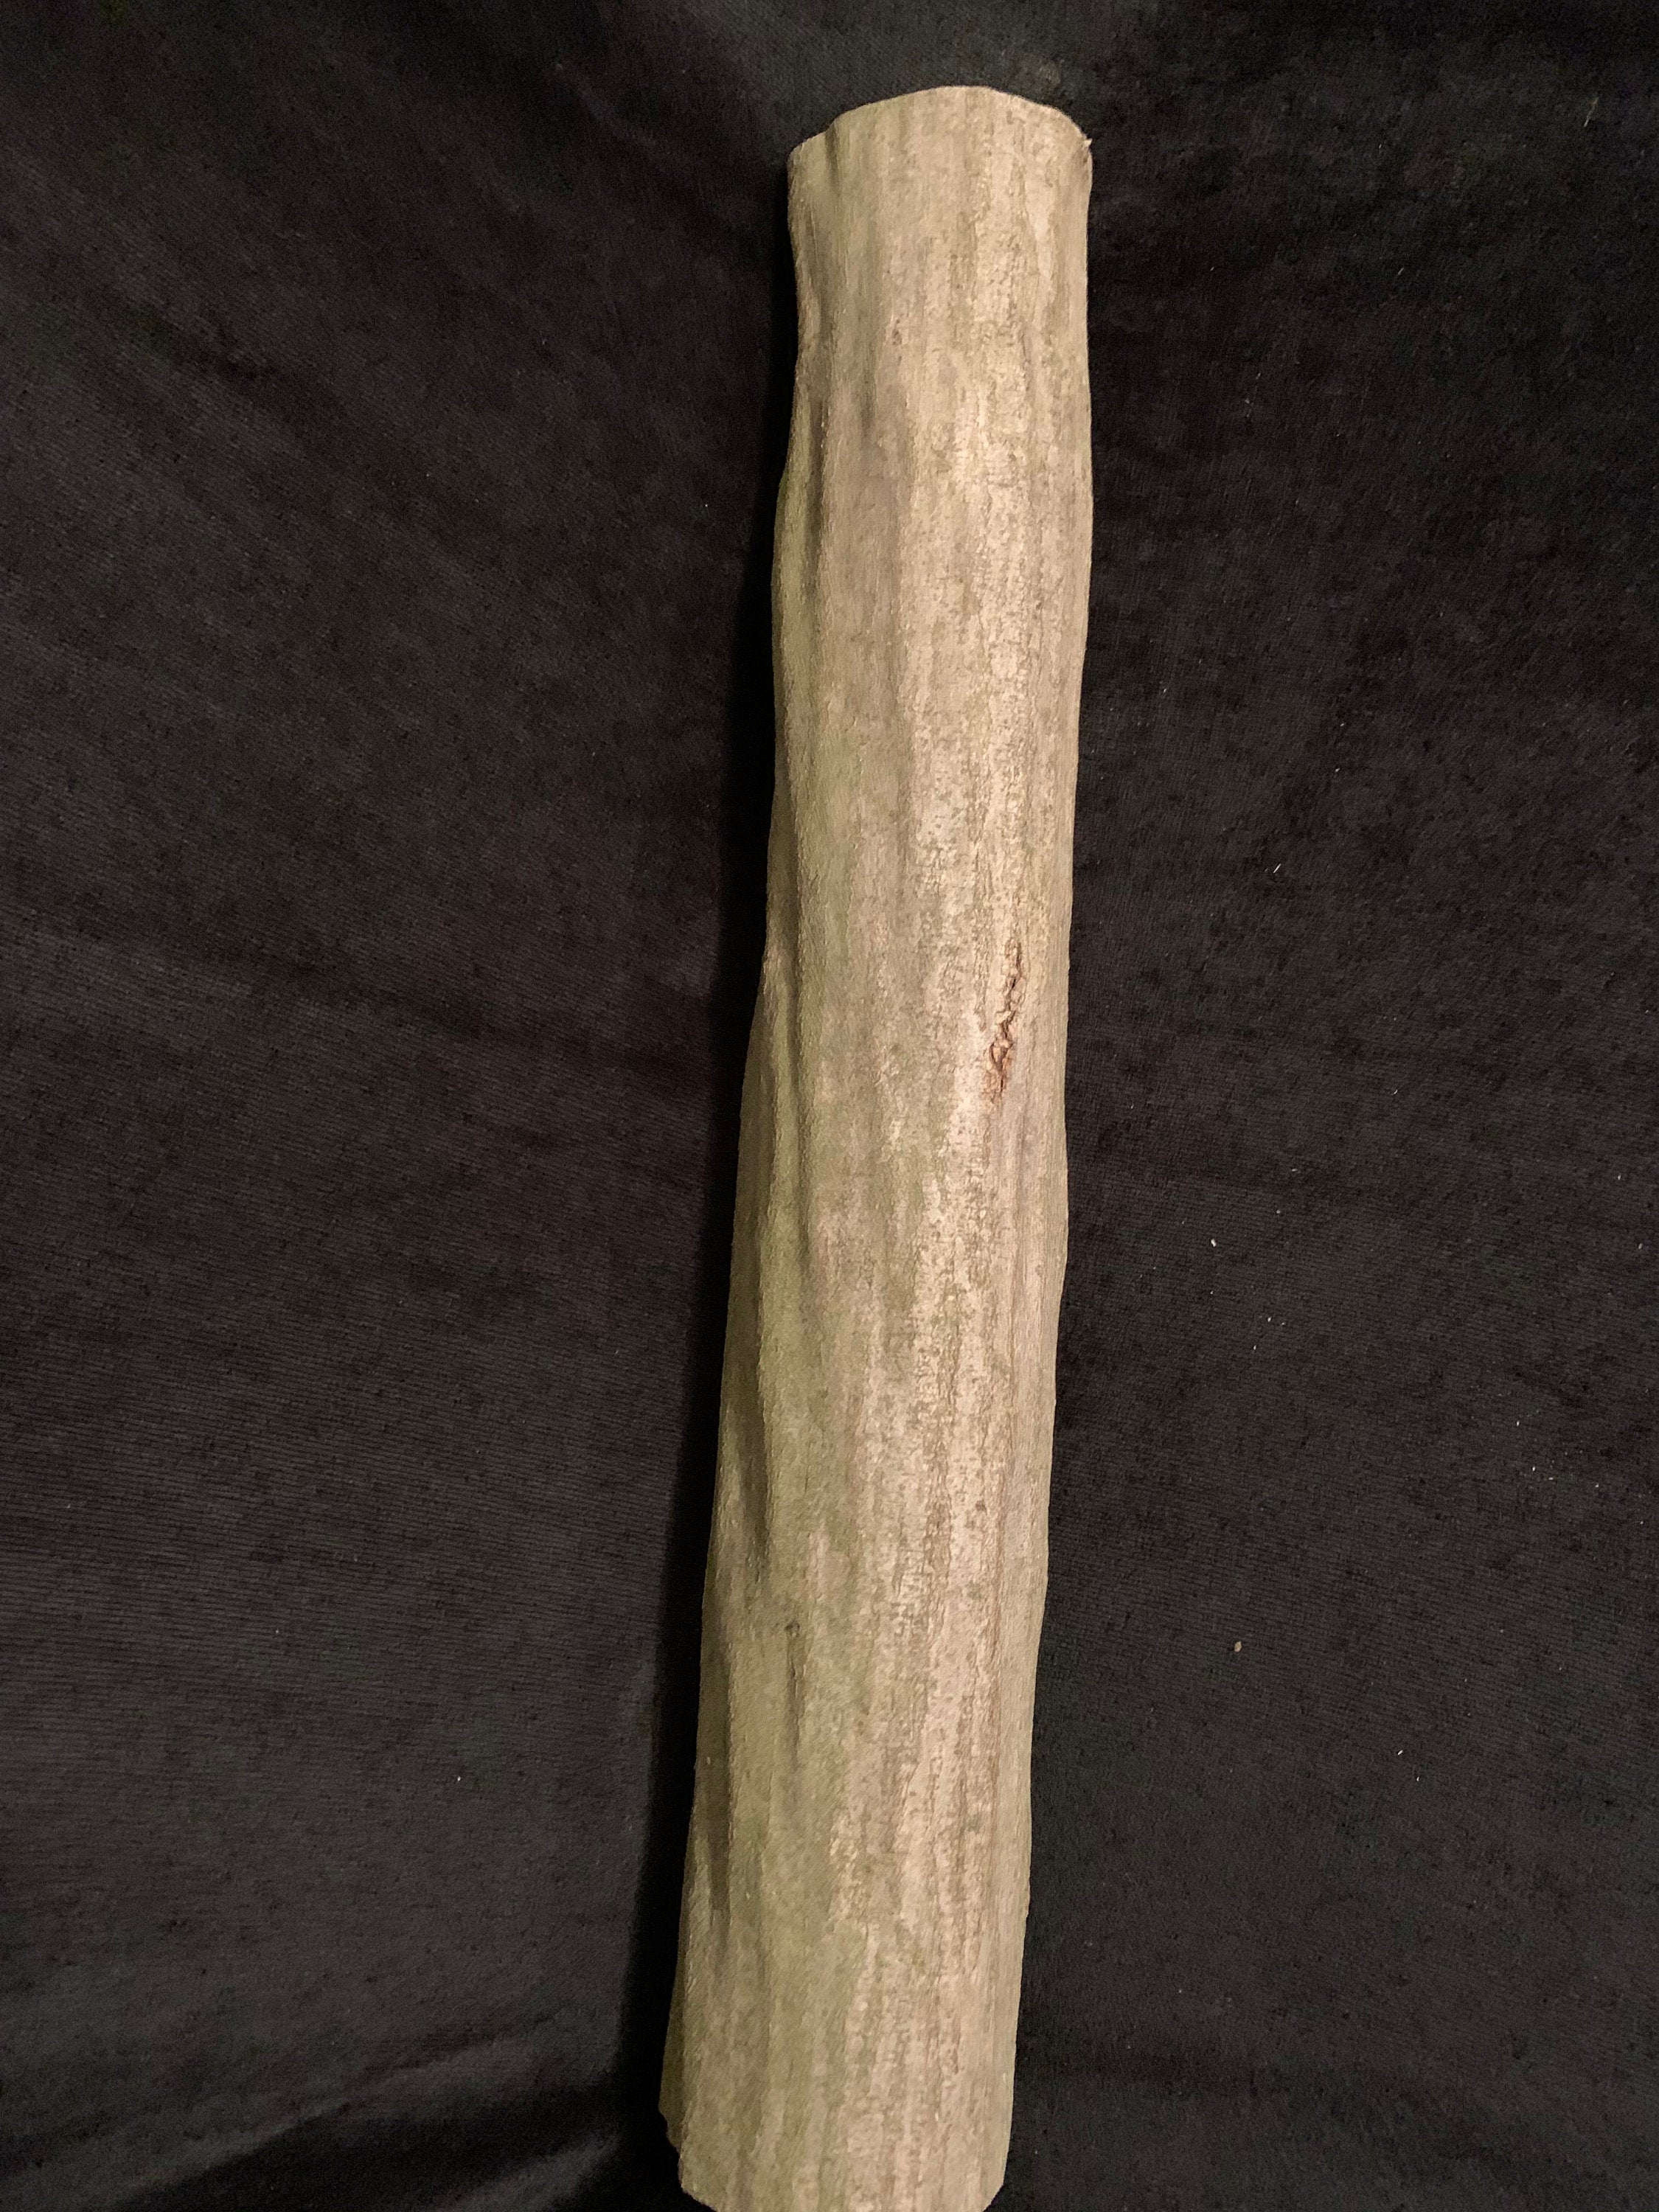 Blue Beech, Musclewood, Ironwood log, approximately 3 inches in diameter and 15 inches long